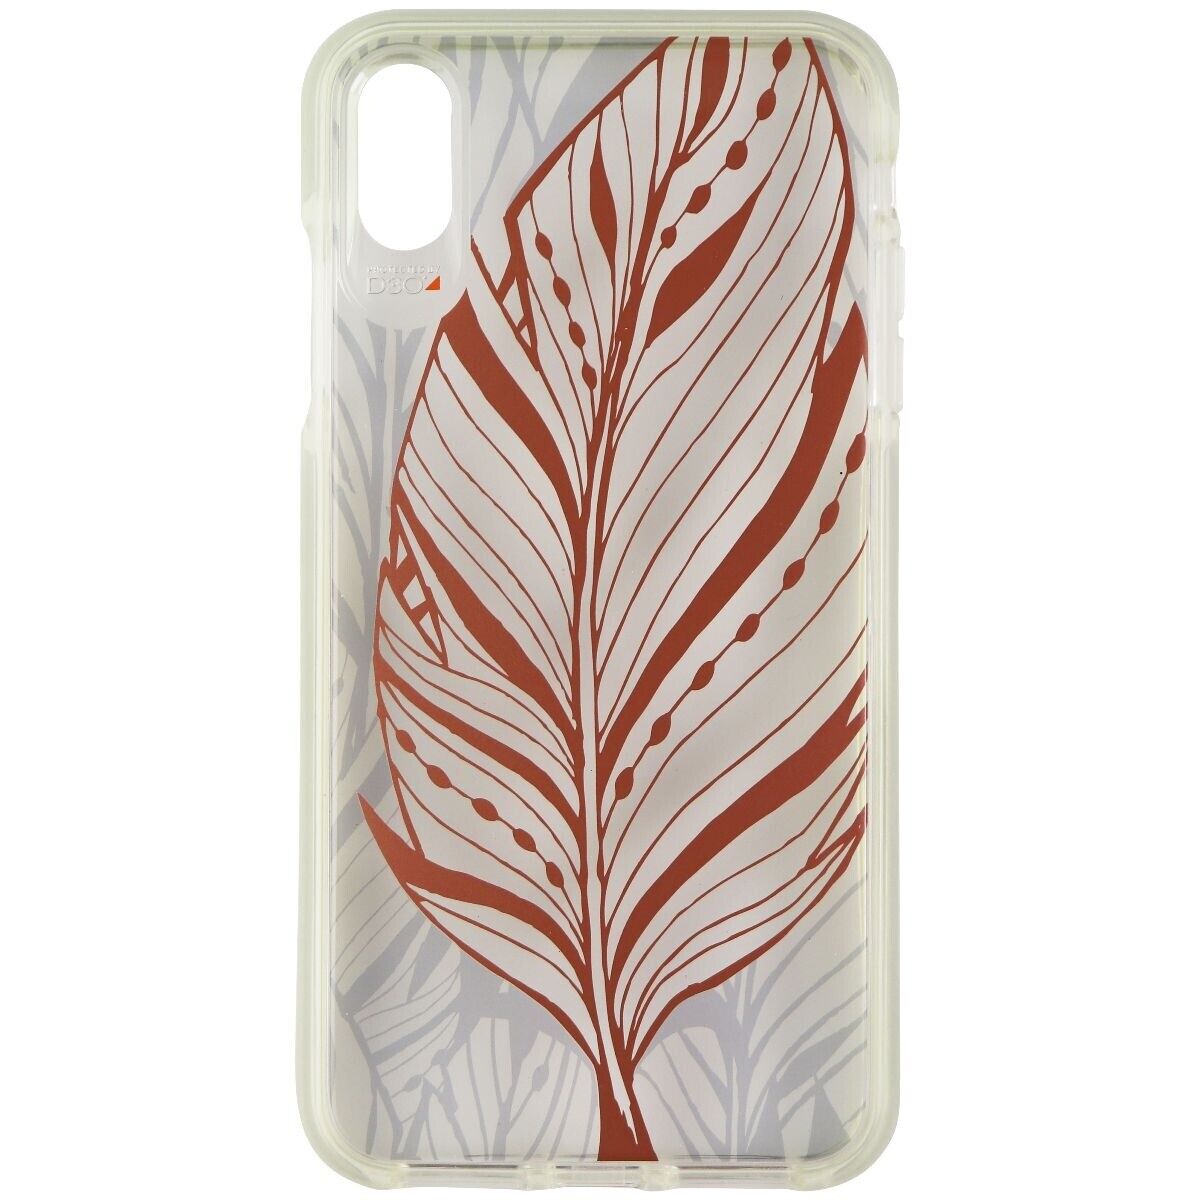 Gear4 Victoria Series Hard Case for Apple iPhone Xs Max - Tribal Leaf/Clear